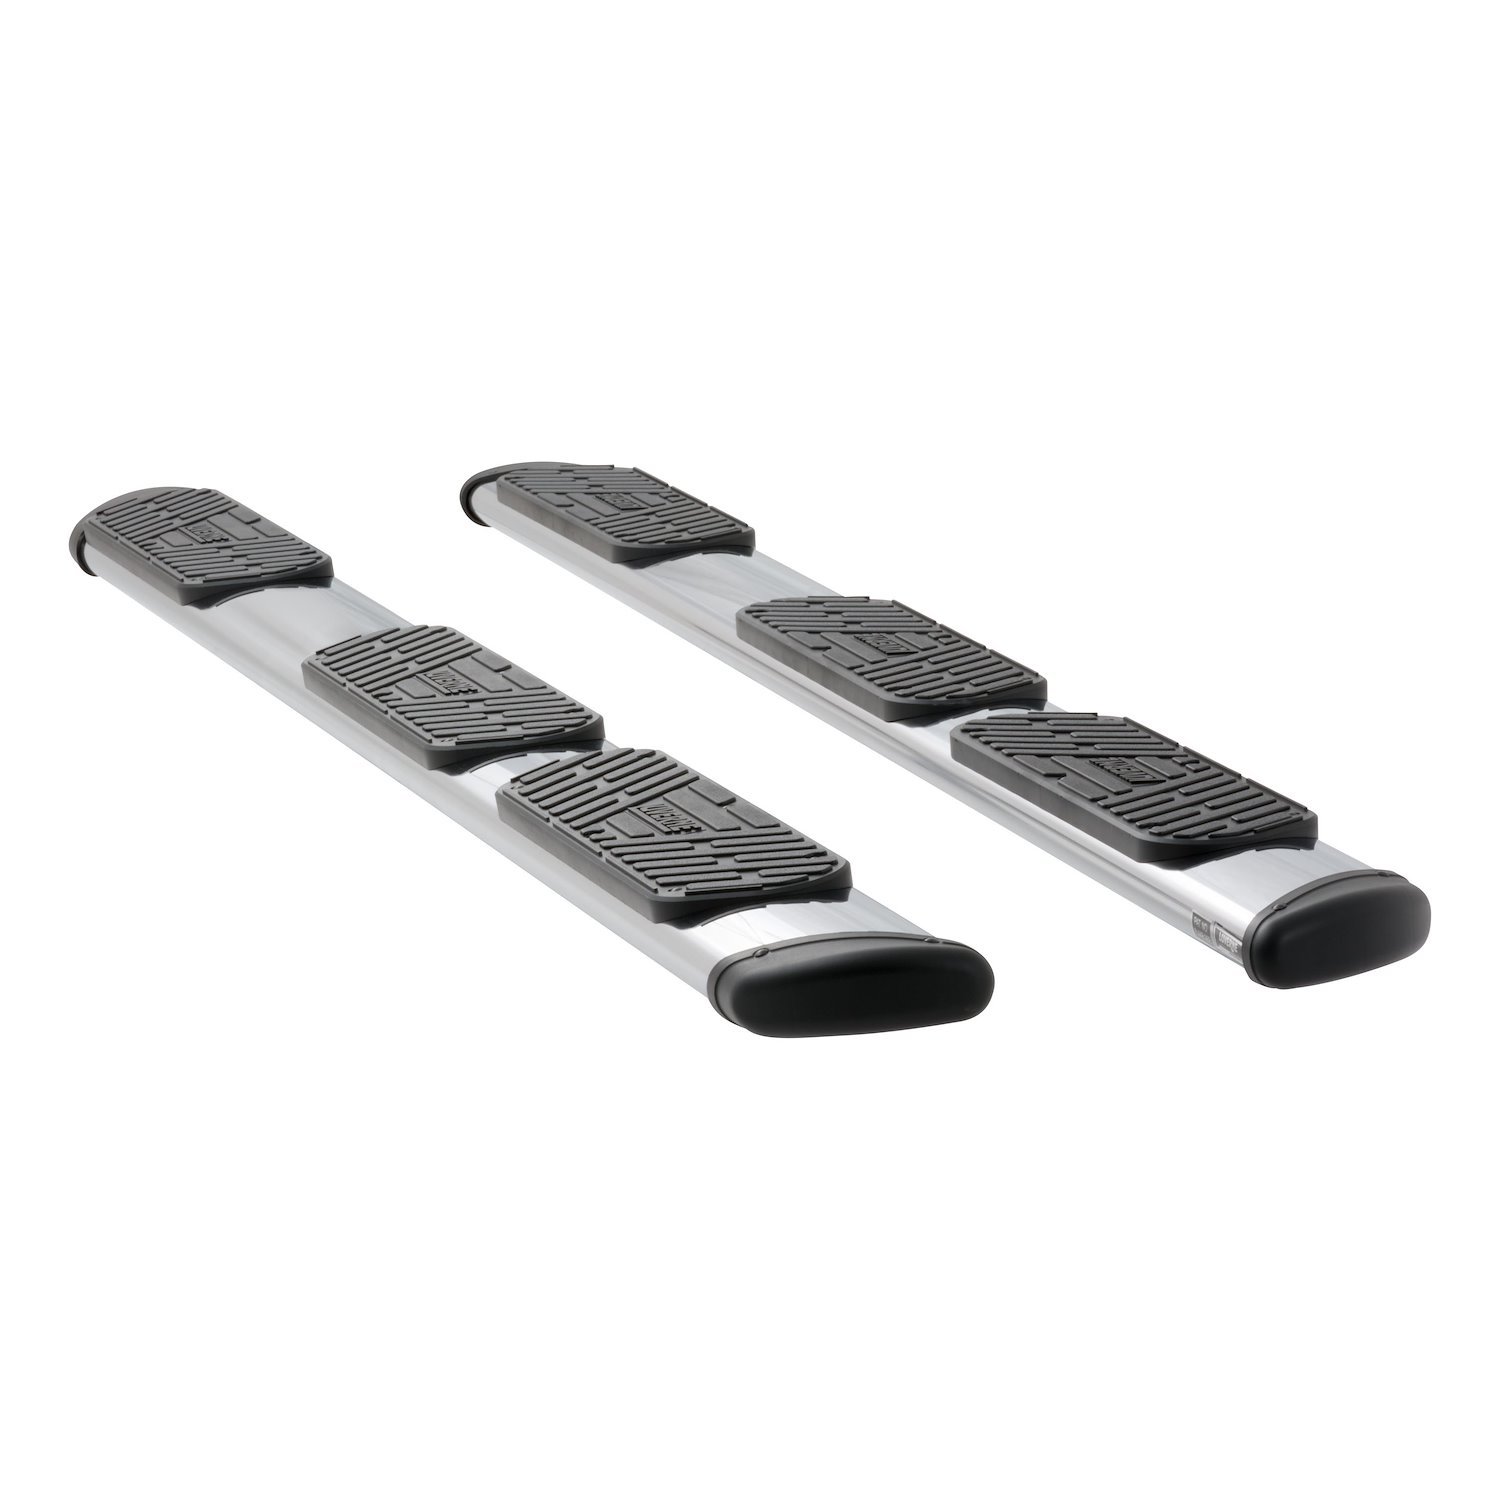 477113-401530 Regal 7 Polished Stainless 113 in. Oval W2W Steps Fits Select Ford F-150 Ext, 8' Bed